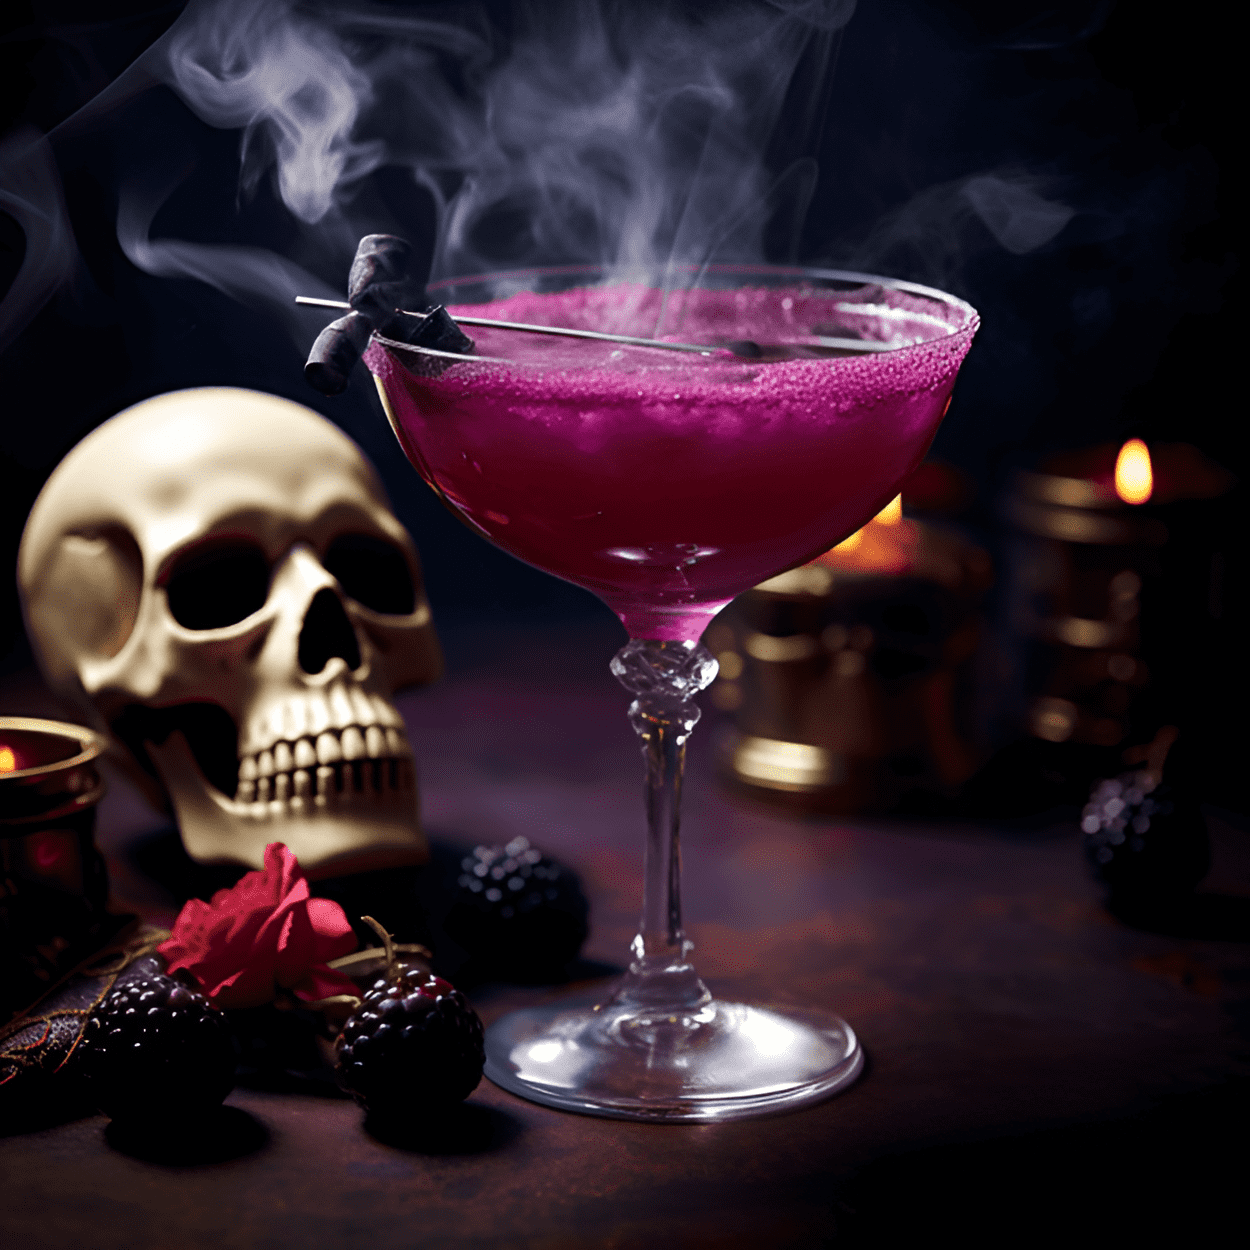 Black Death Cocktail Recipe - The Black Death cocktail is a potent mix of sweet, sour, and strong. The sweetness of the blackcurrant liqueur balances the tartness of the lemon juice, while the vodka gives it a powerful kick. It's a cocktail that's full of contrast and complexity.